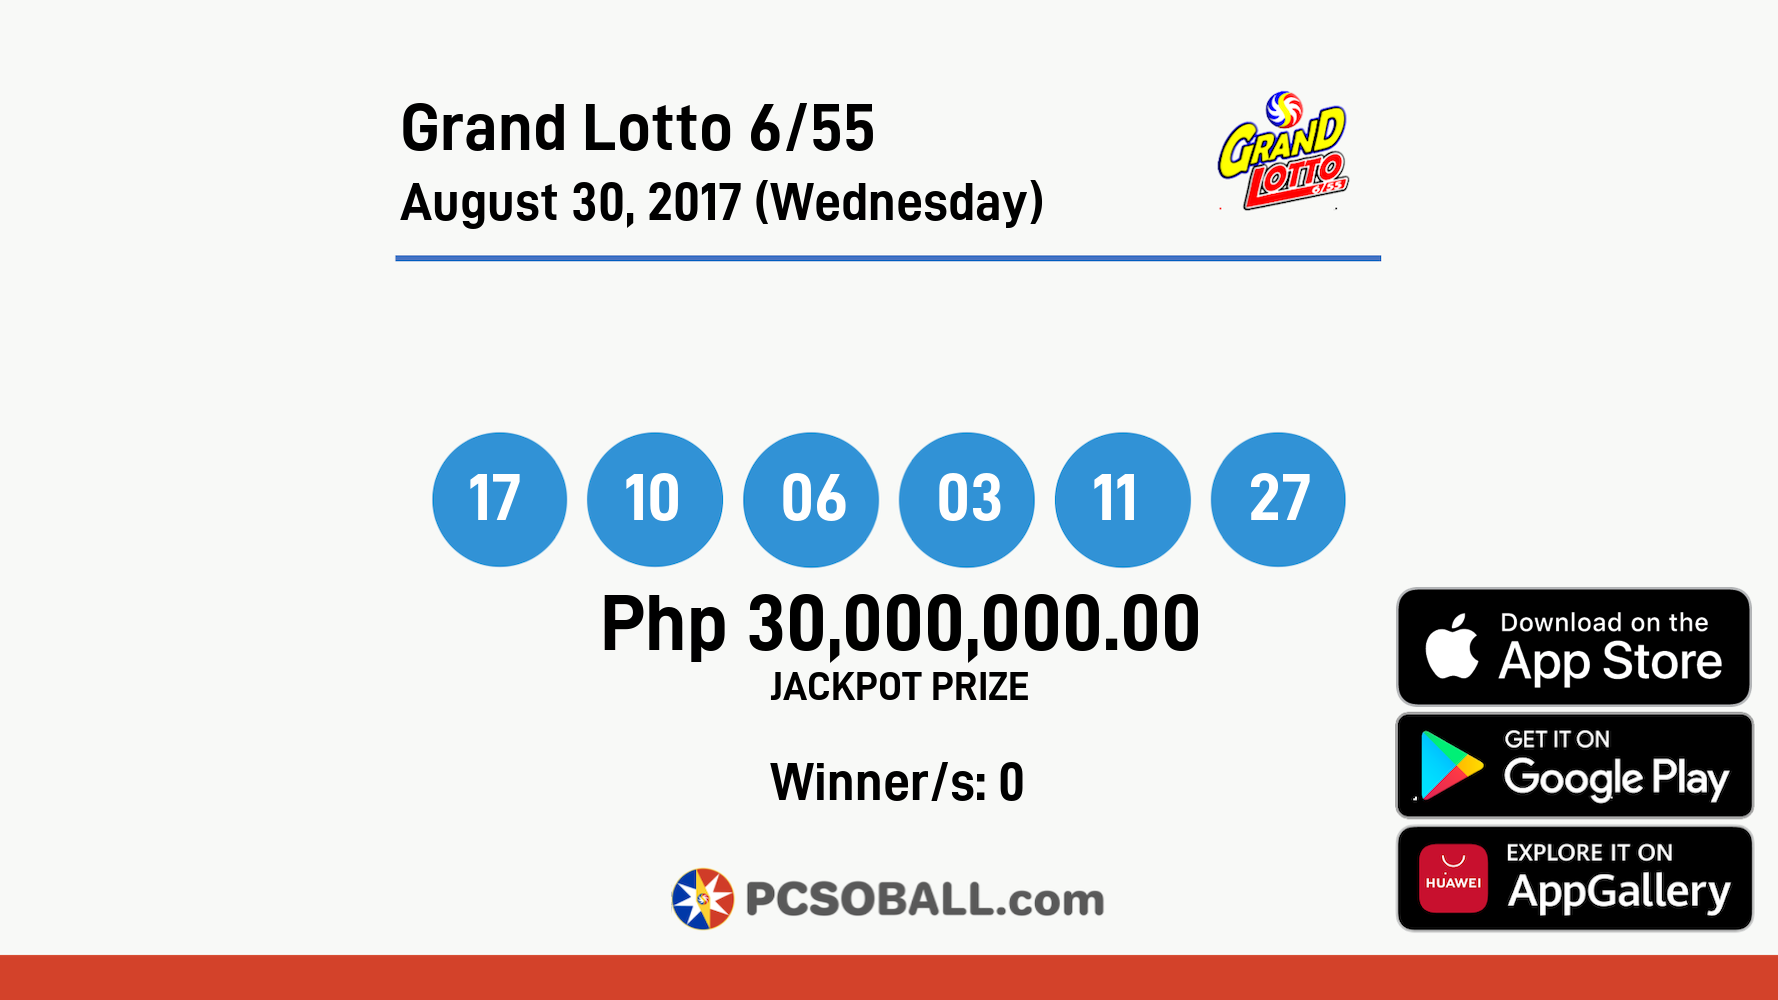 Grand Lotto 6/55 August 30, 2017 (Wednesday) Result